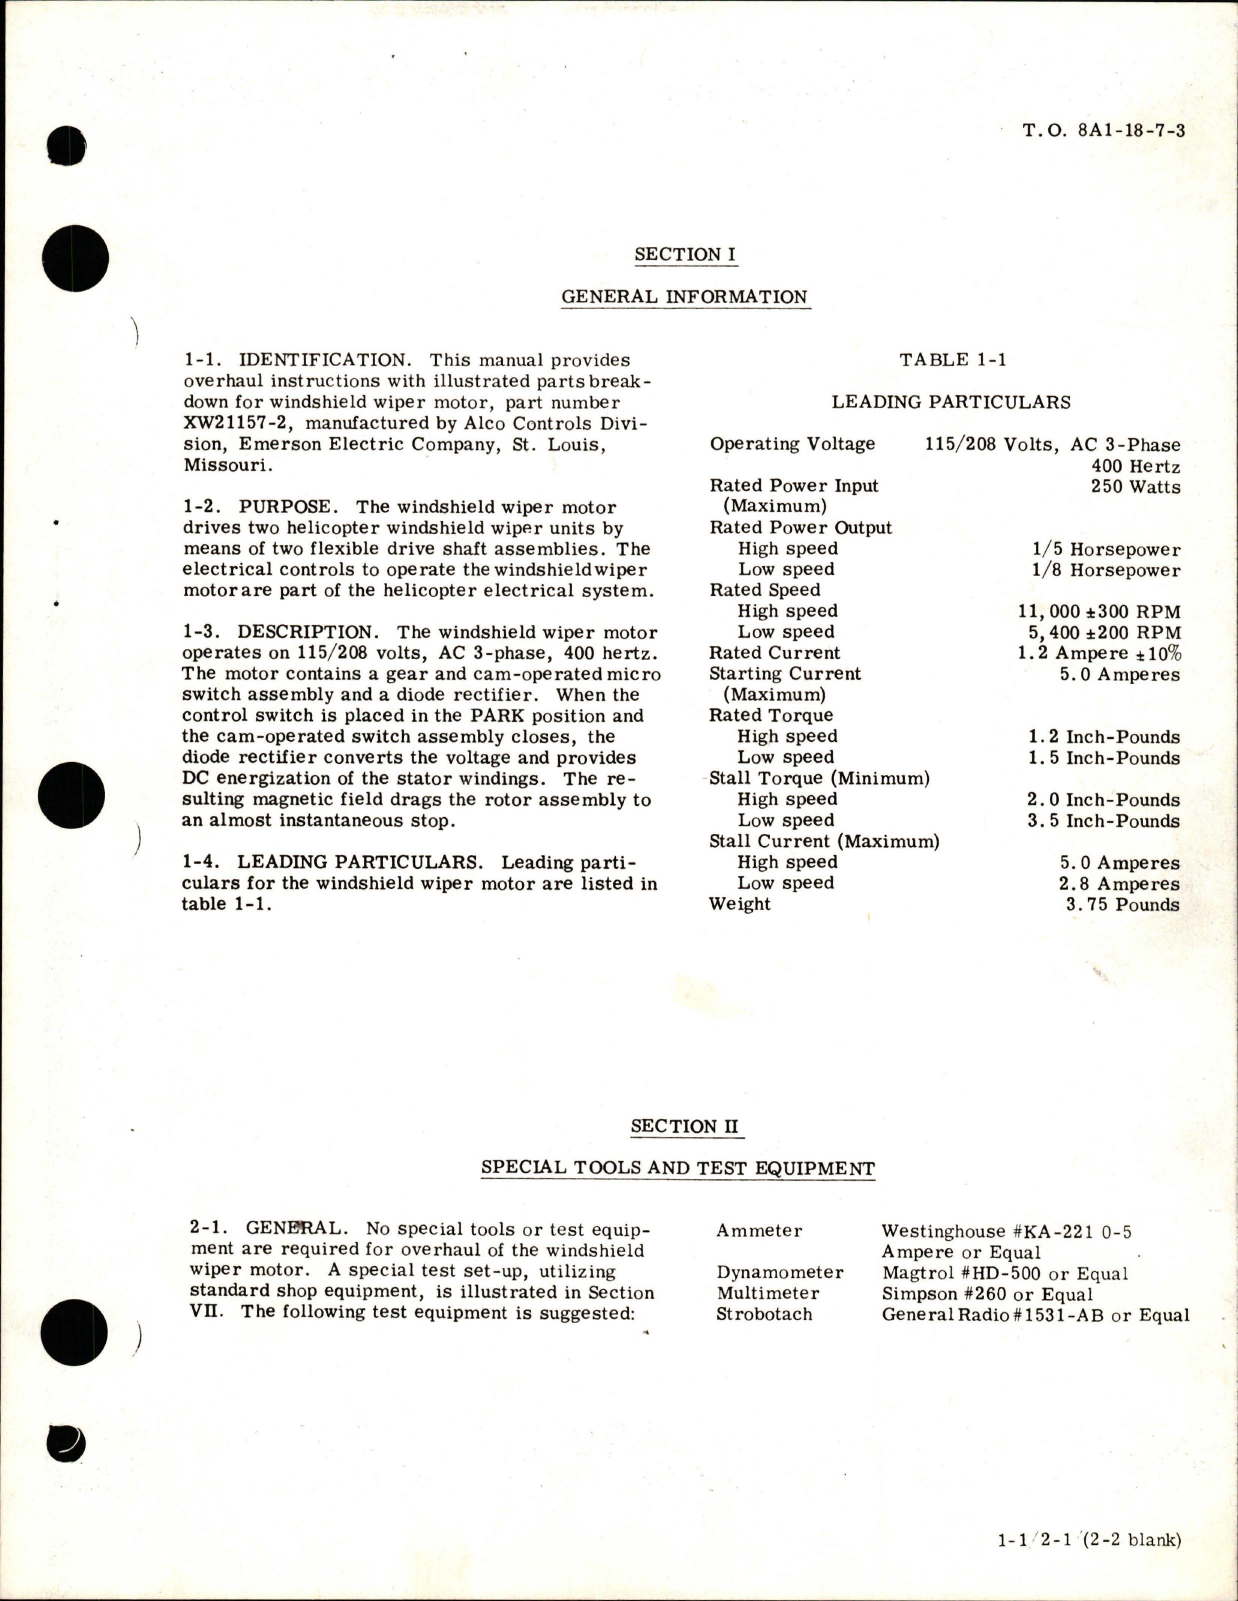 Sample page 5 from AirCorps Library document: Overhaul Instructions with Illustrated Parts Breakdown for Windshield Wiper Motor - Part XW21157-2 